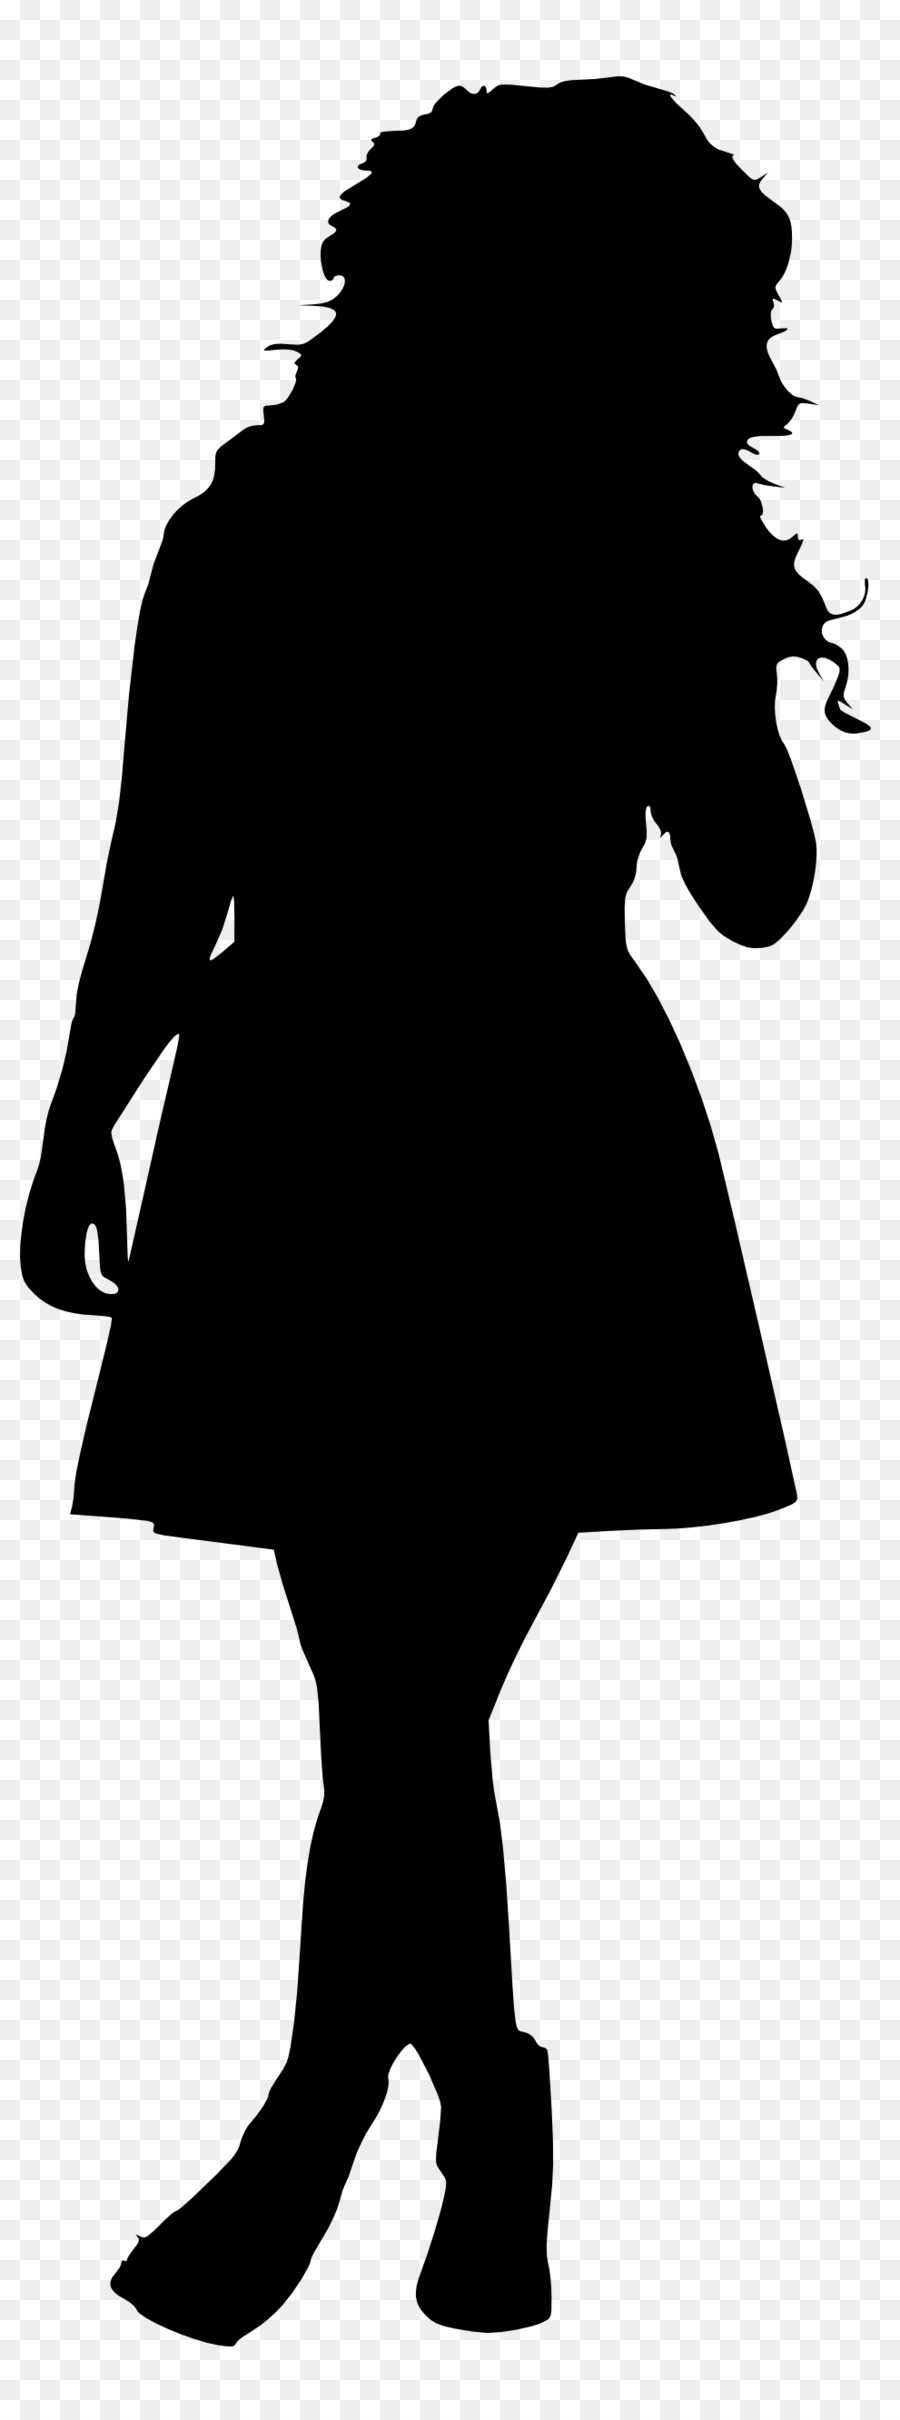 Silhouette Fashion design Female Woman - woman silhouette png download - 991*2644 - Free Transparent Silhouette png Download.